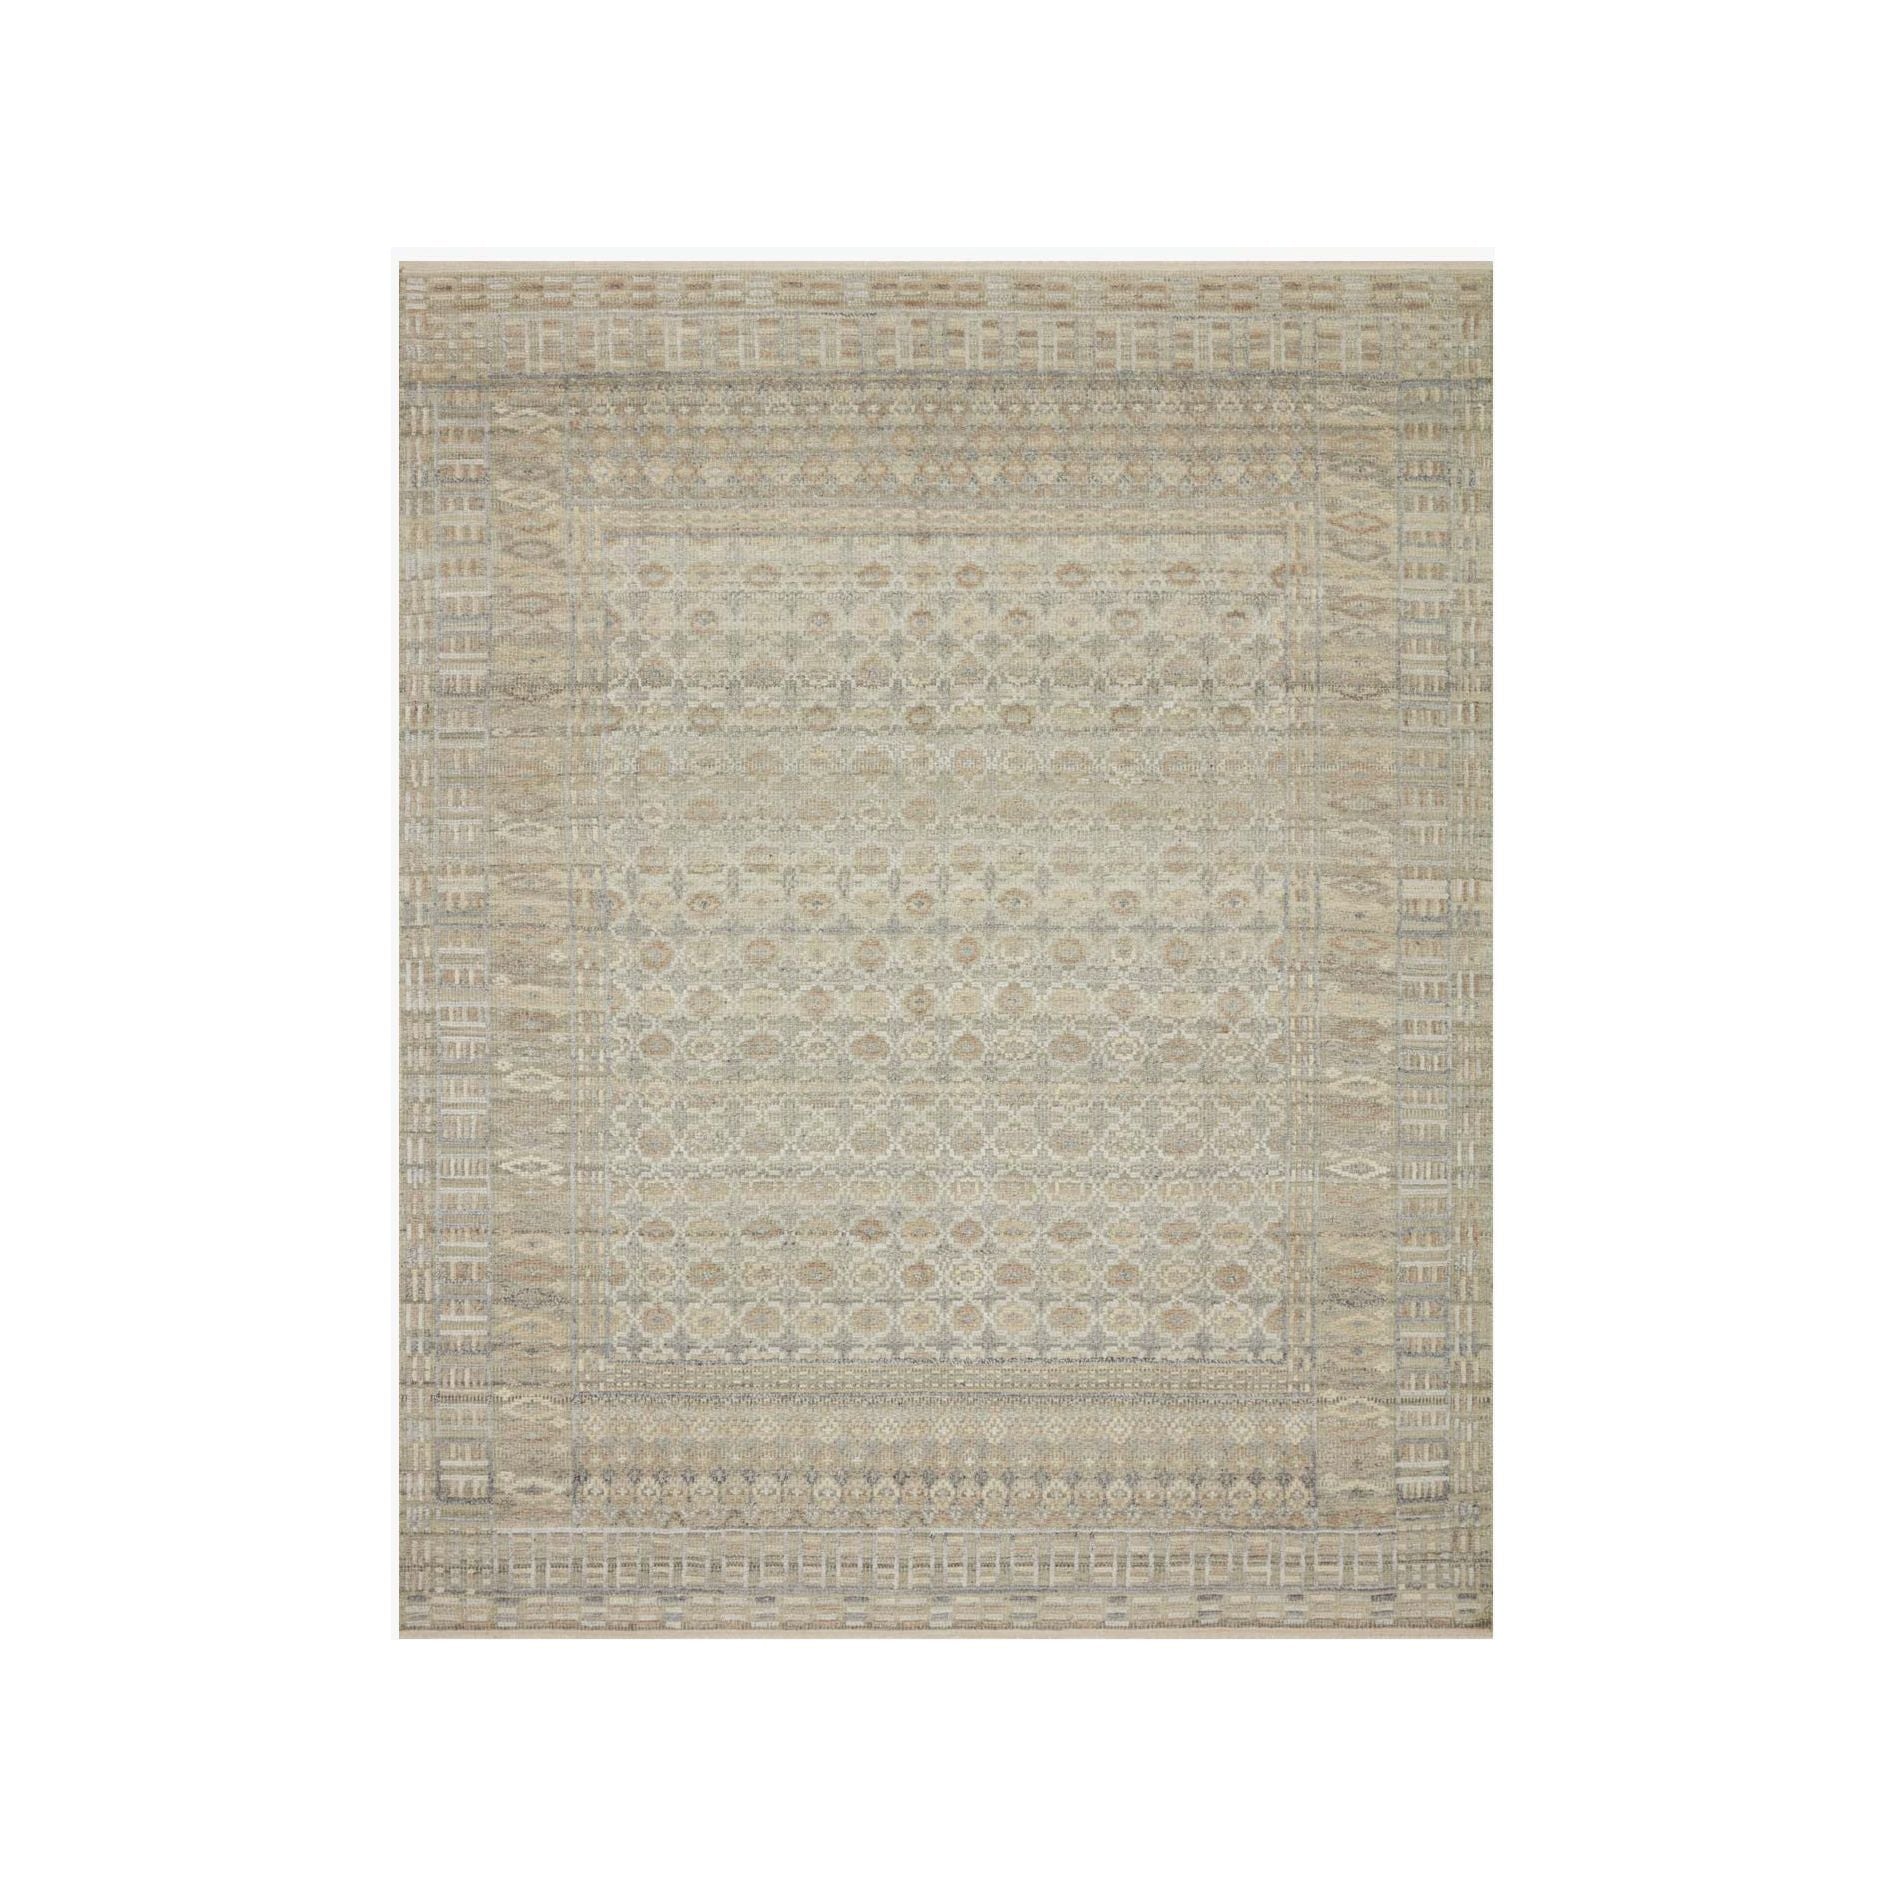 Timeless yet modern, the Nola Sand / Beige Area Rug is hand-knotted in India of viscose, cotton, wool and other fibers. The tonal collection showcases an elevated texture, accentuating the pattern in every piece.  Hand Knotted 66% Viscose | 25% Wool | 7% Cotton | 2% Other Fiber Pile NOL-03 Sand / Beige